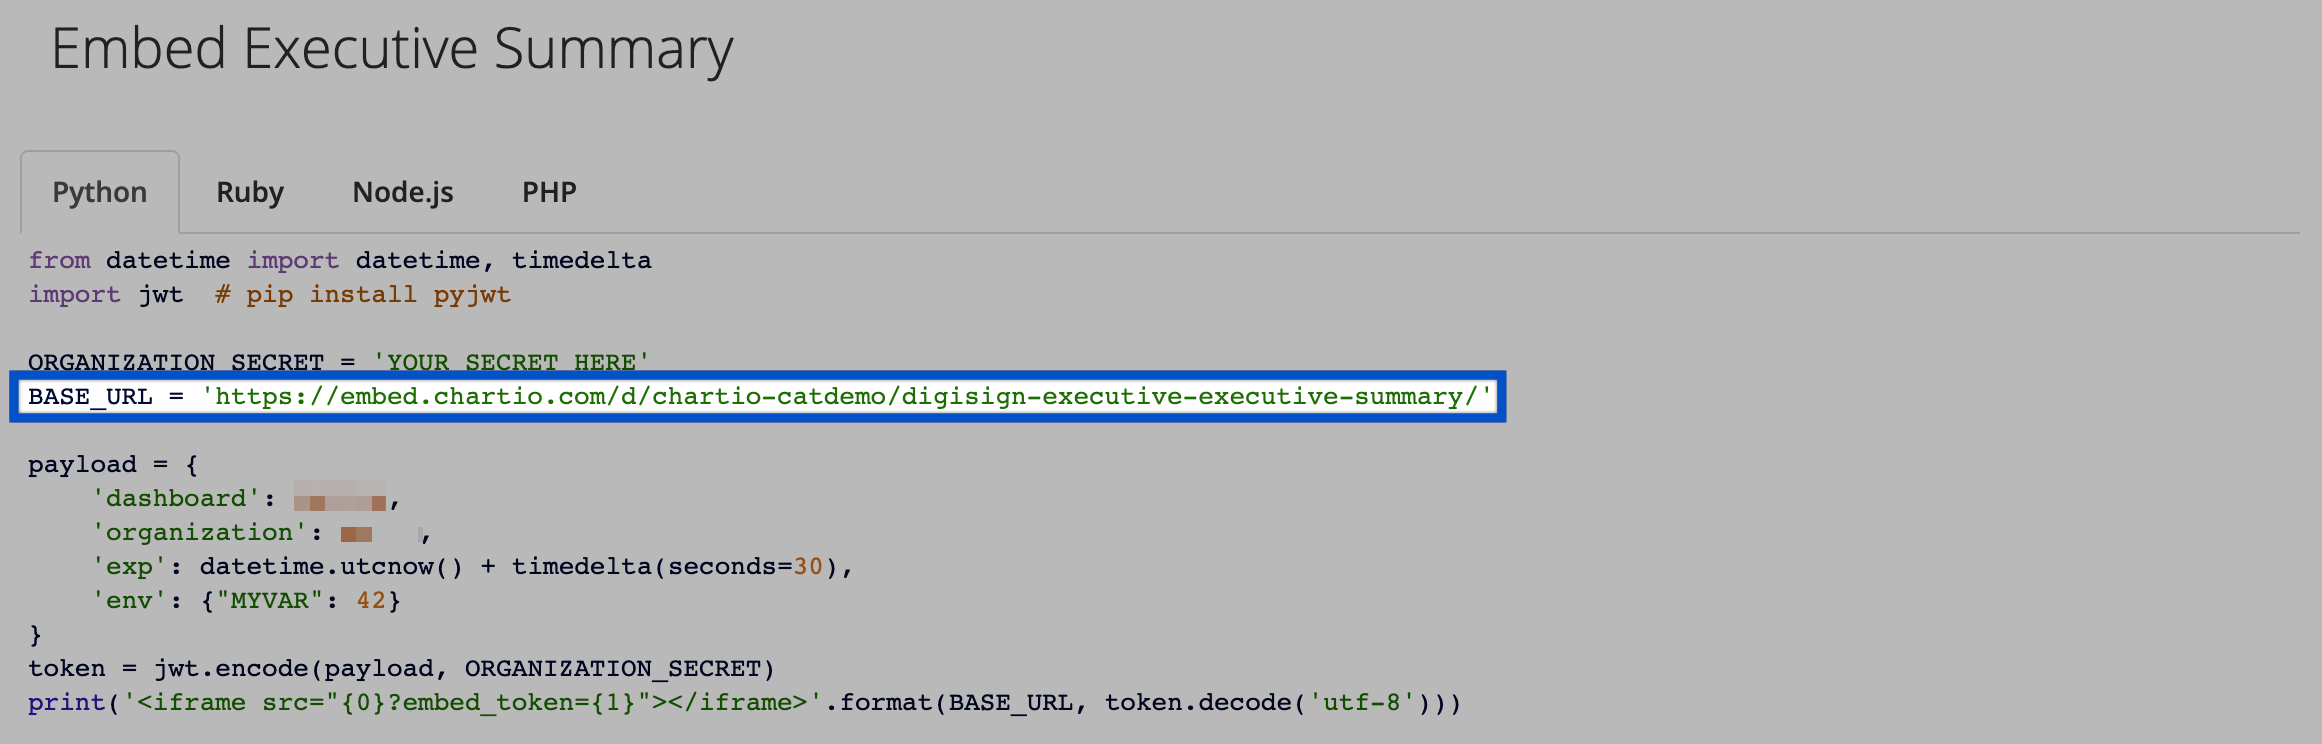 Check the example embed code to verify you're using the correct URL